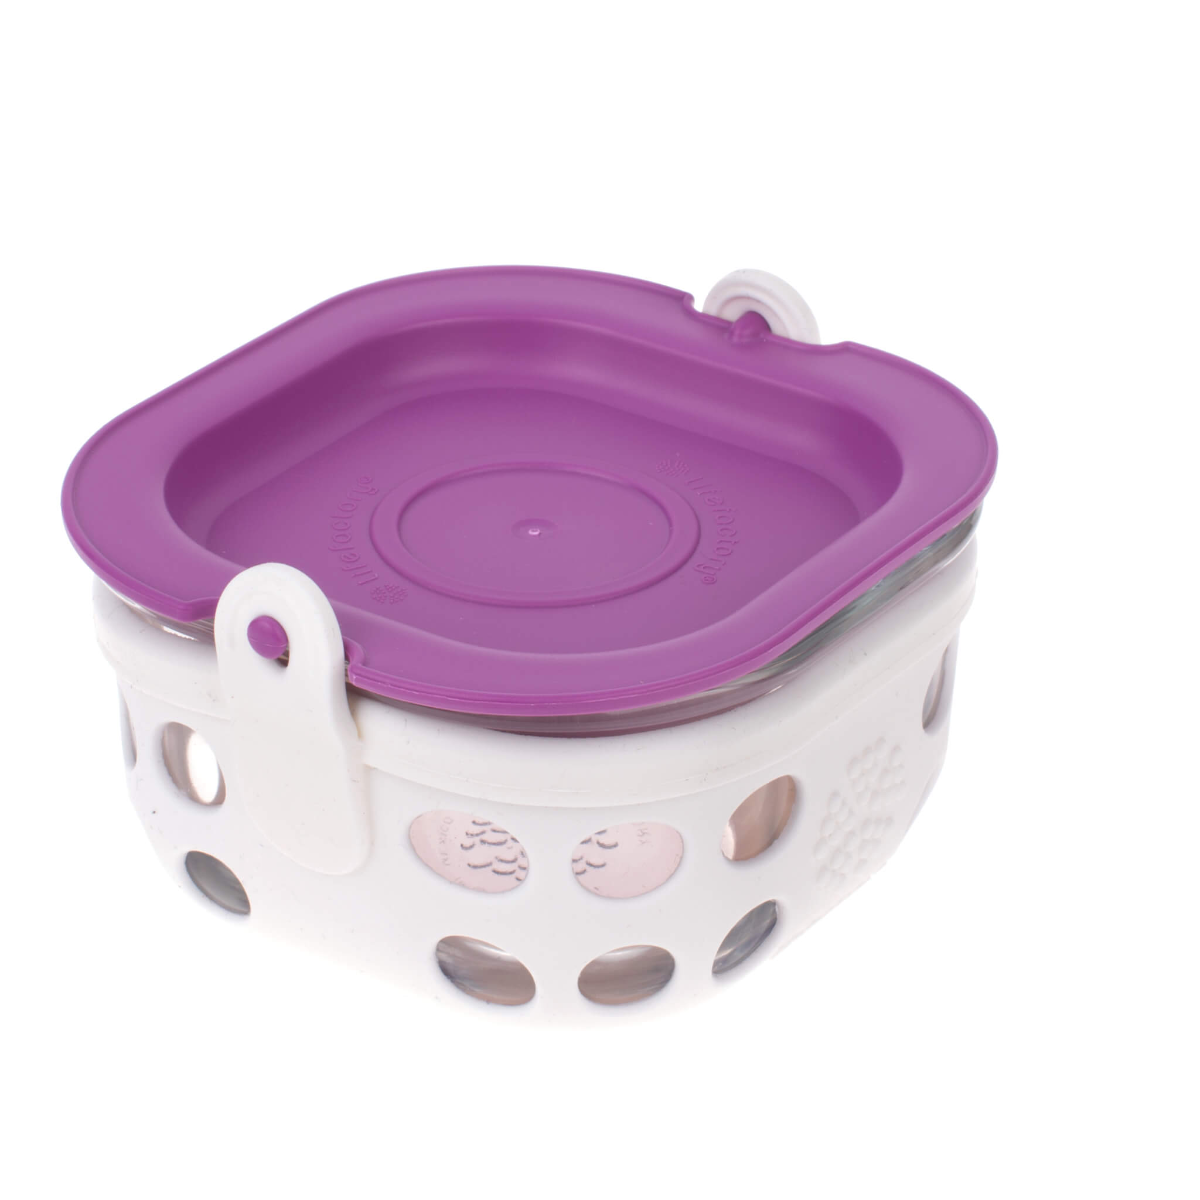 Glass Food Storage Container with Pink Lid